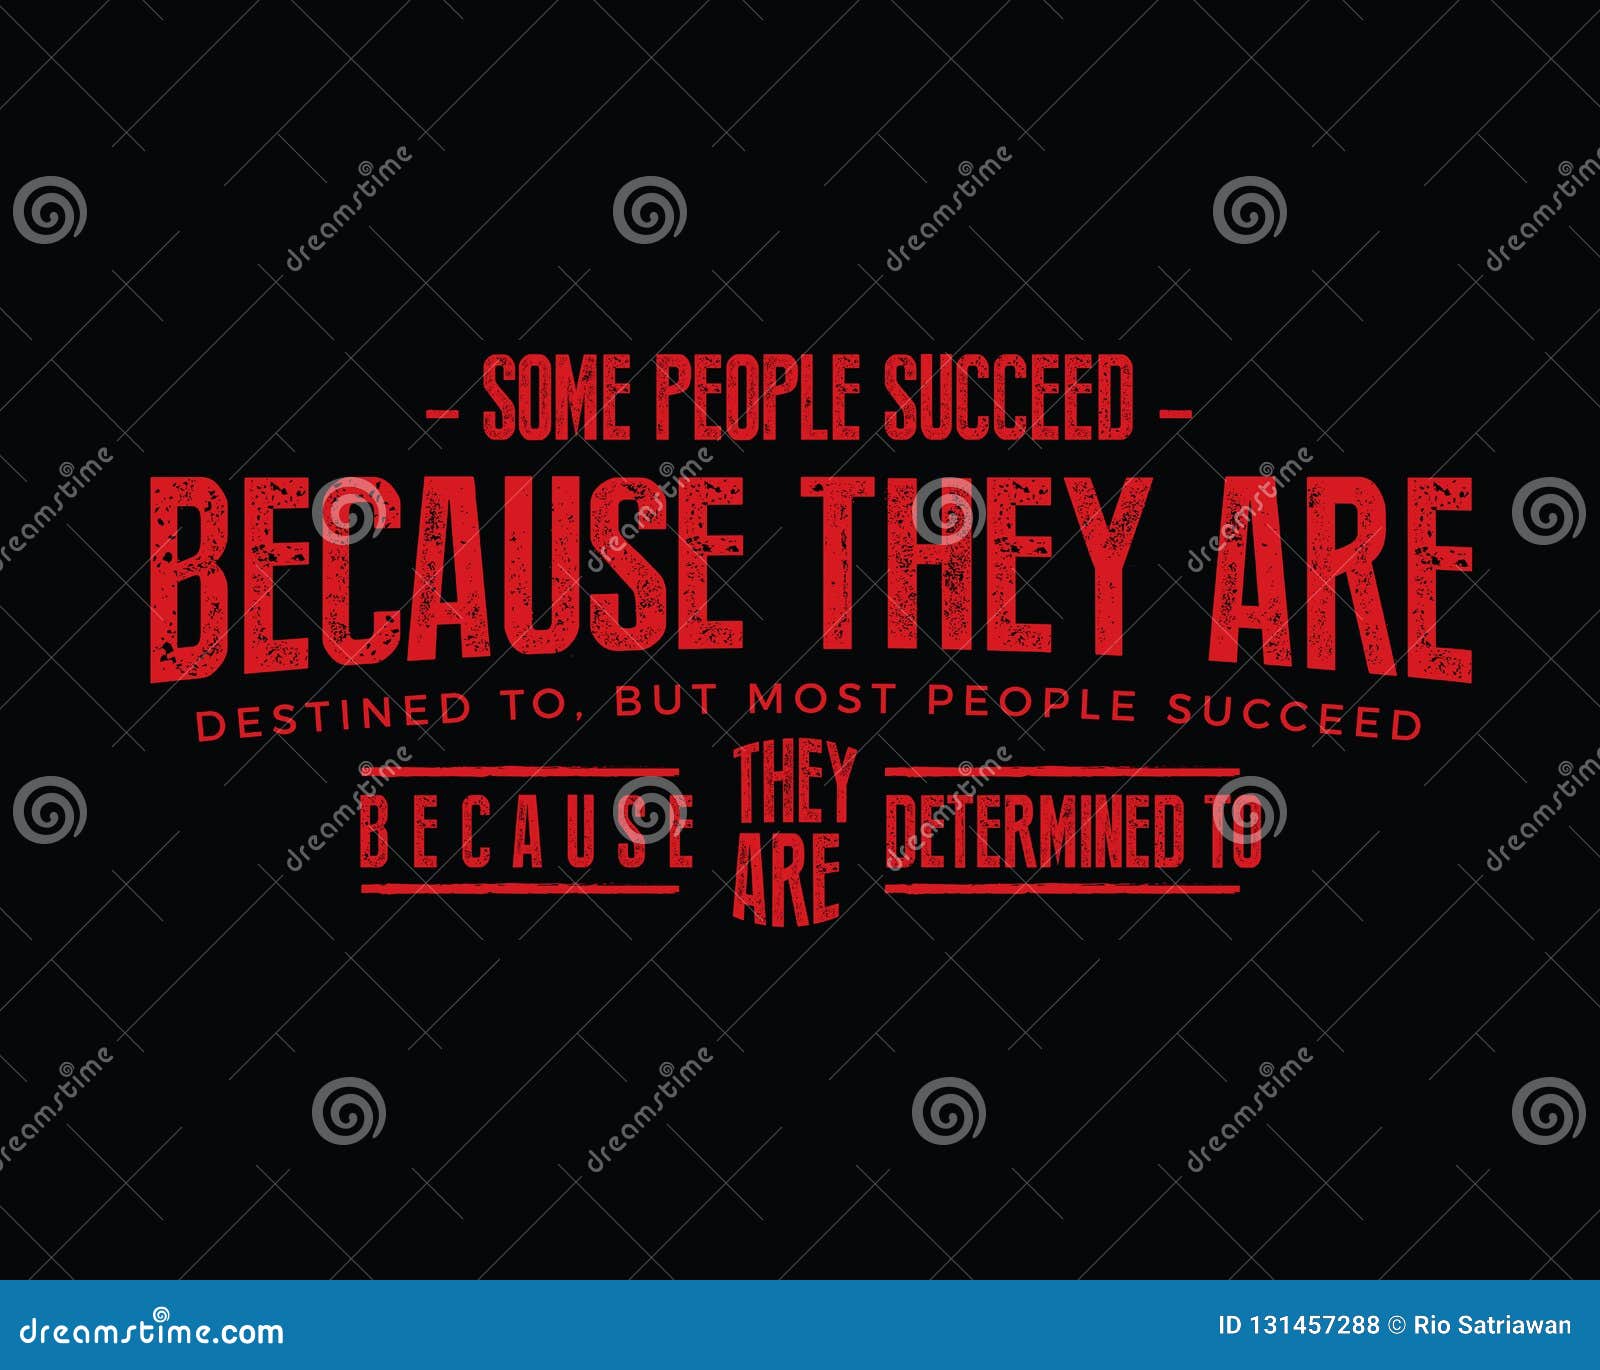 Some People Succeed because they are Destined To, but Most People ...